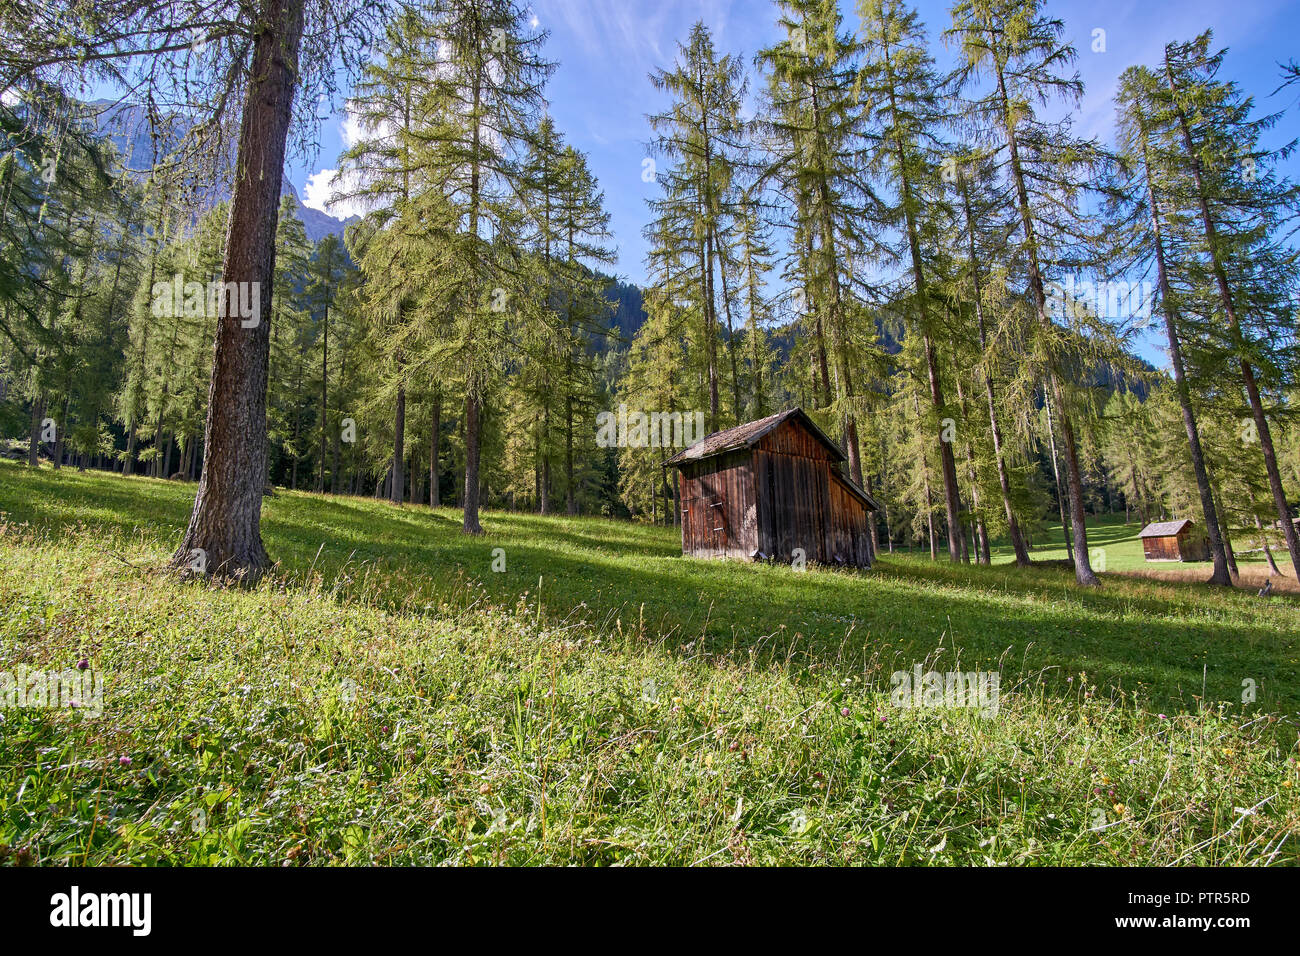 Farmers' huts, meadow and pine forest along the Fischleintal (Val Fiscalina), Naturpark Sextner Dolomiten (Parco Naturale Dolomiti di Sesto), Italy Stock Photo